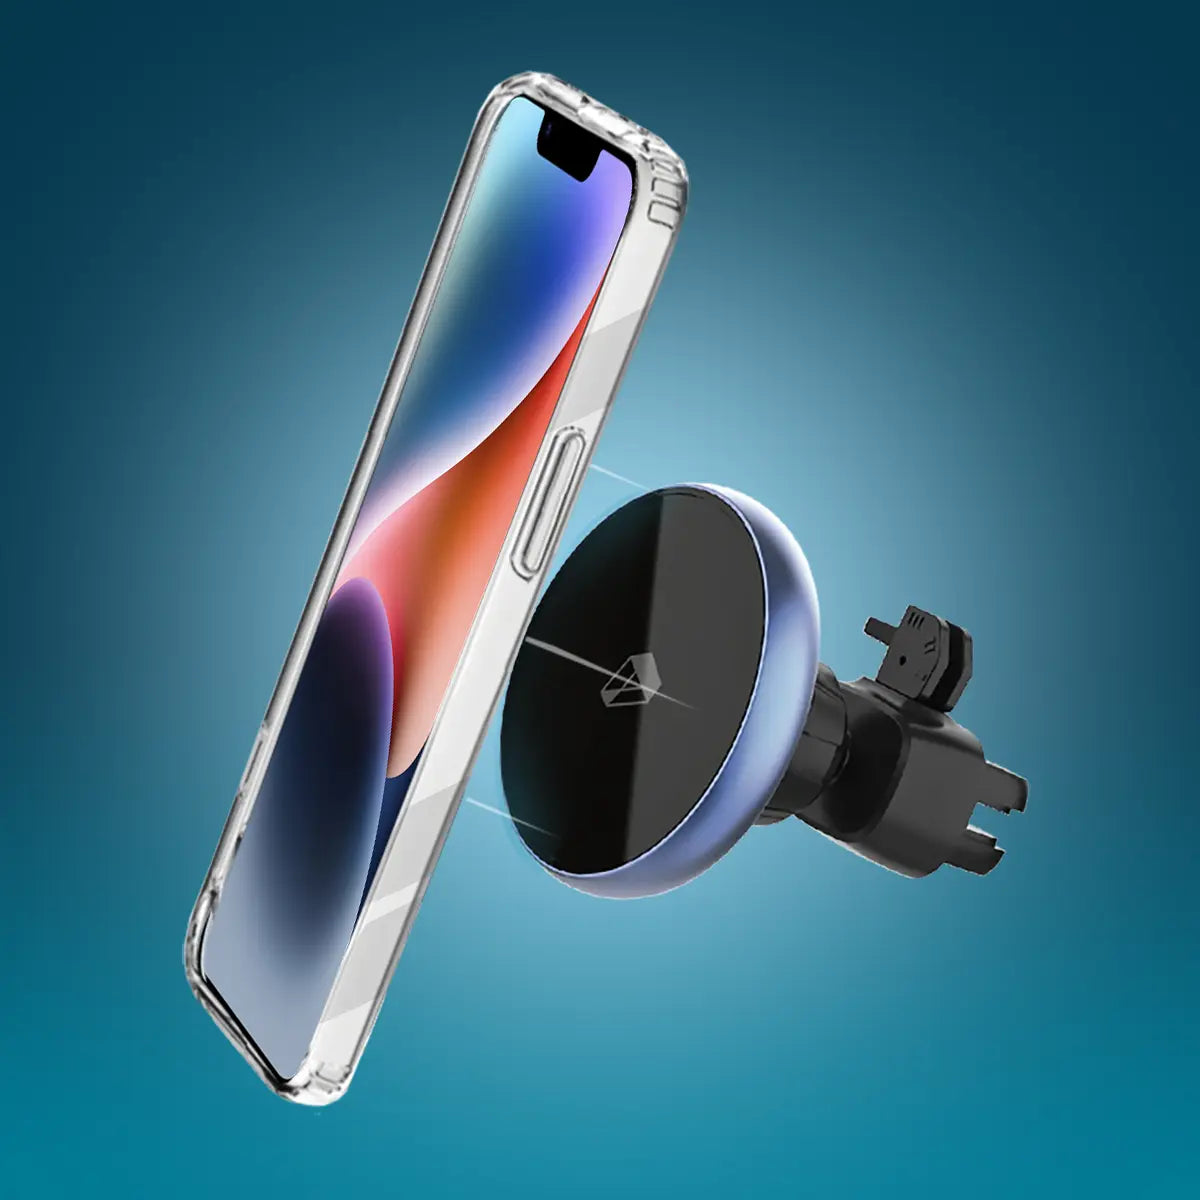 MagSafe Car Mount + FREE iPhone Case Bundle - Ride-Share Drivers